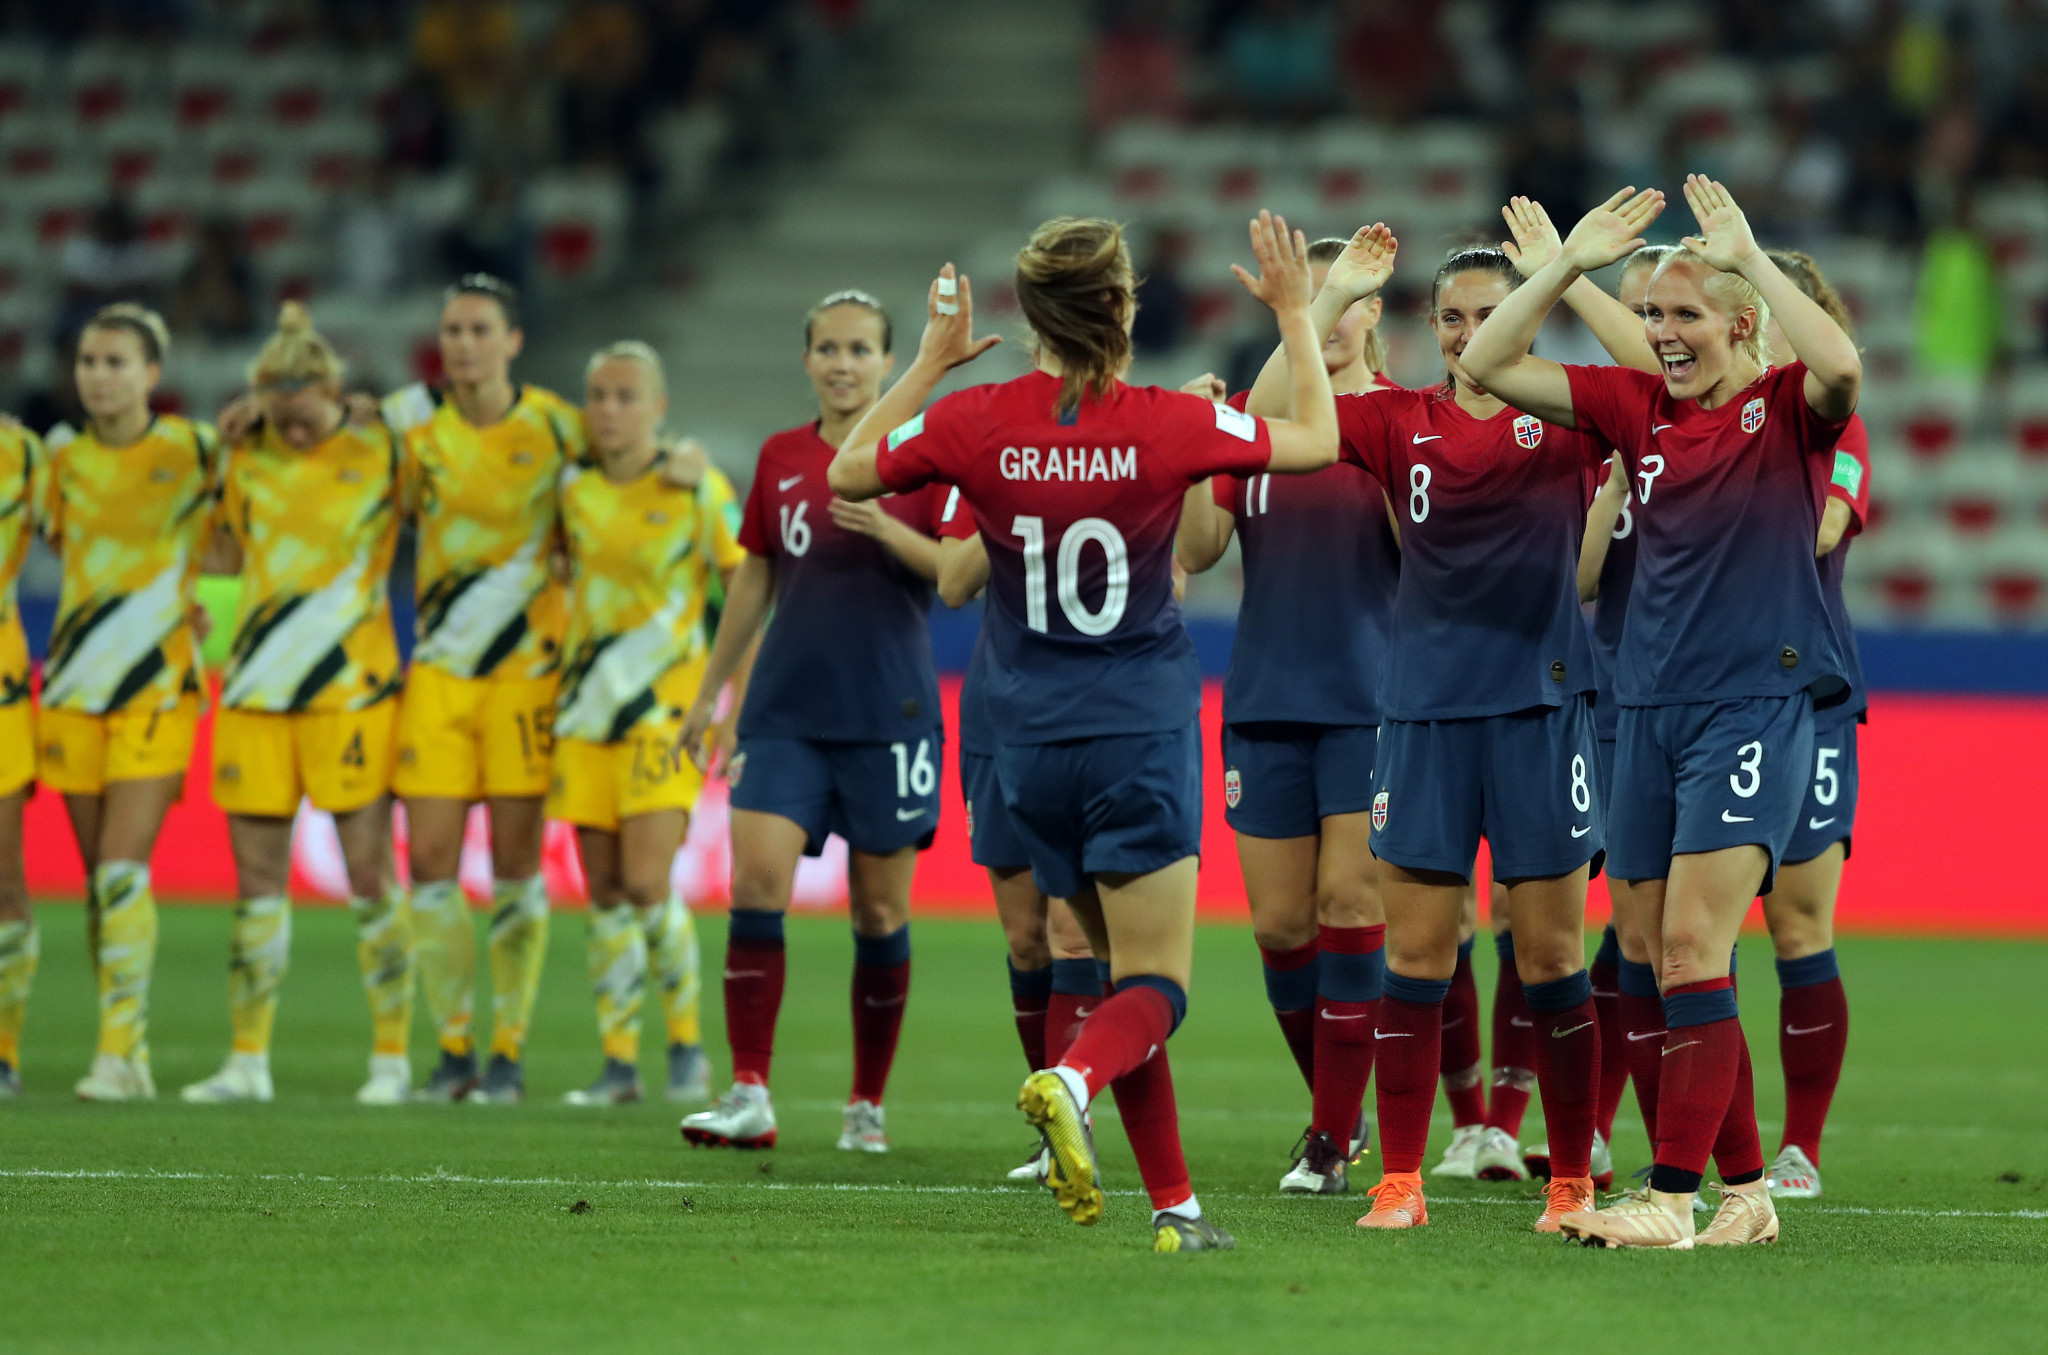 Norway reached the quarter-finals of the FIFA Women's World Cup after beating Australia on penalties ©Getty Images